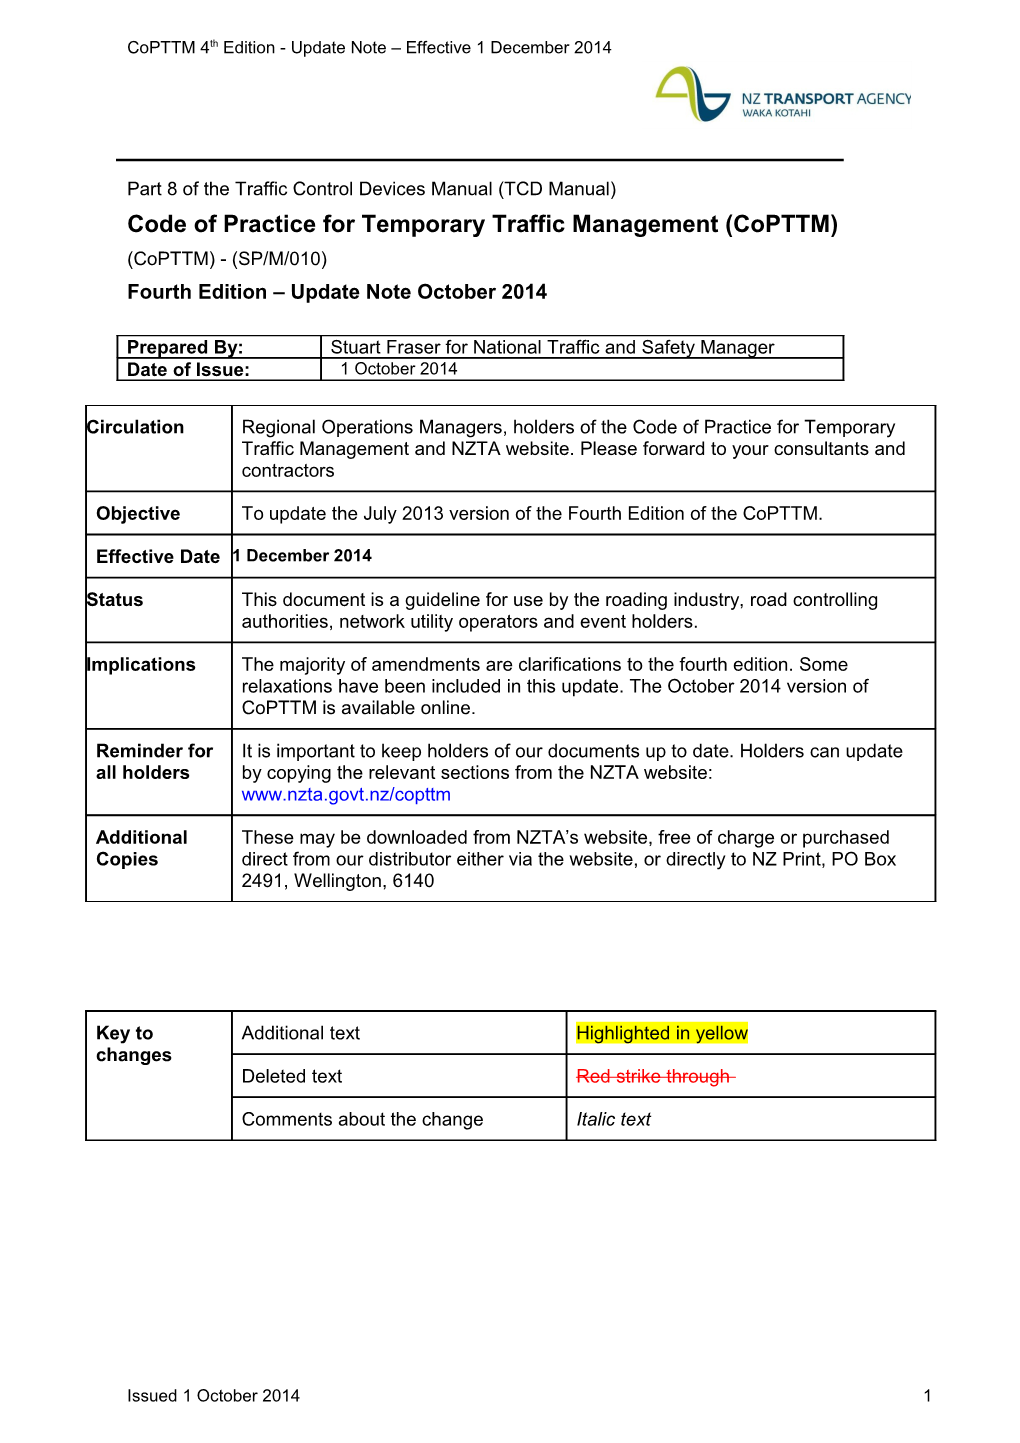 Code of Practice for Temporary Traffic Management (Copttm)